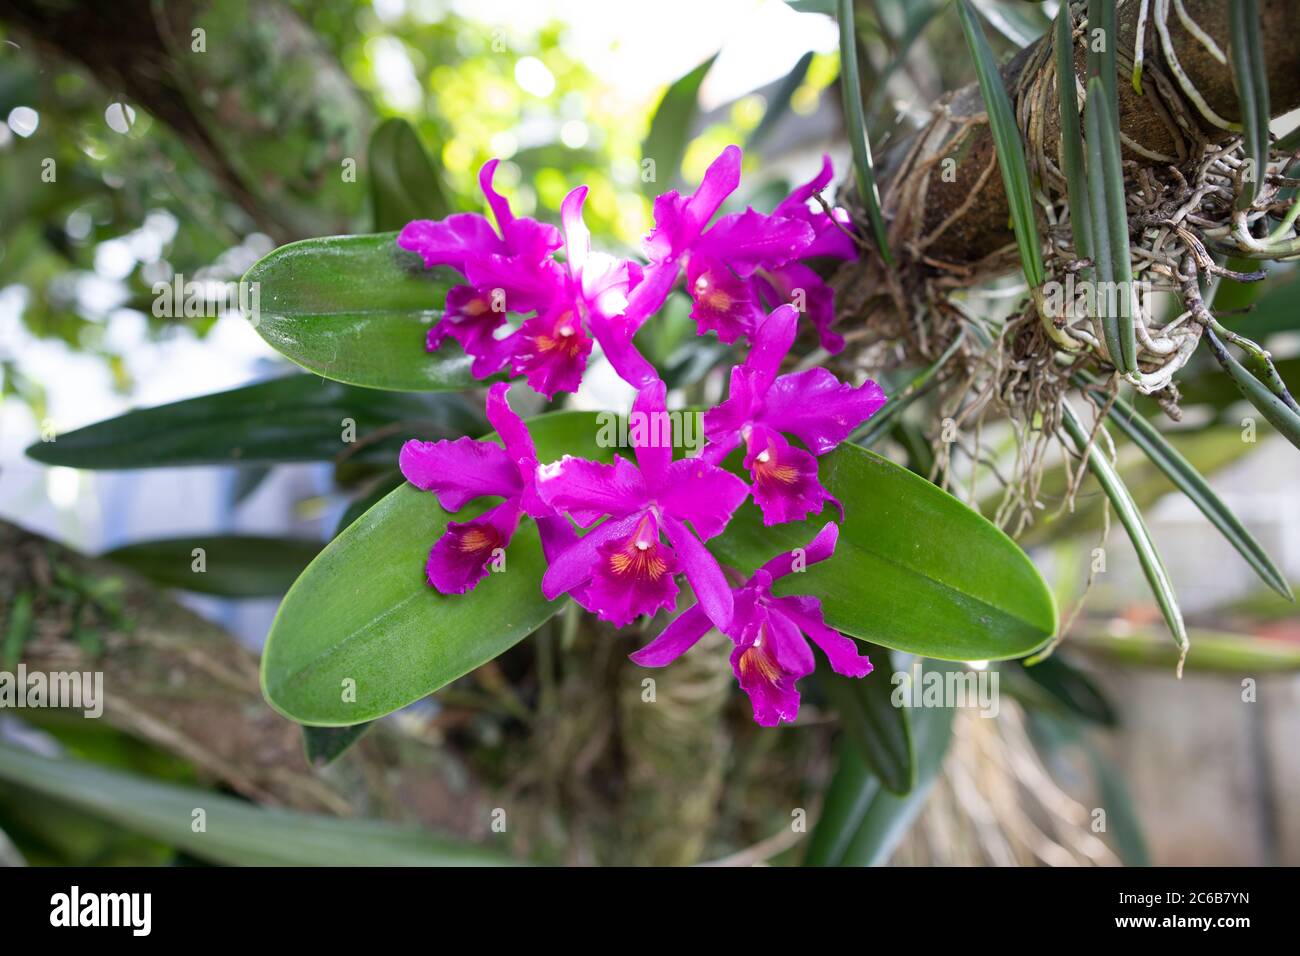 Guarianthe skinneri is the national flower of Costa Rica, where it is known as guaria morada. It was referenced as Cattleya skinneri Stock Photo